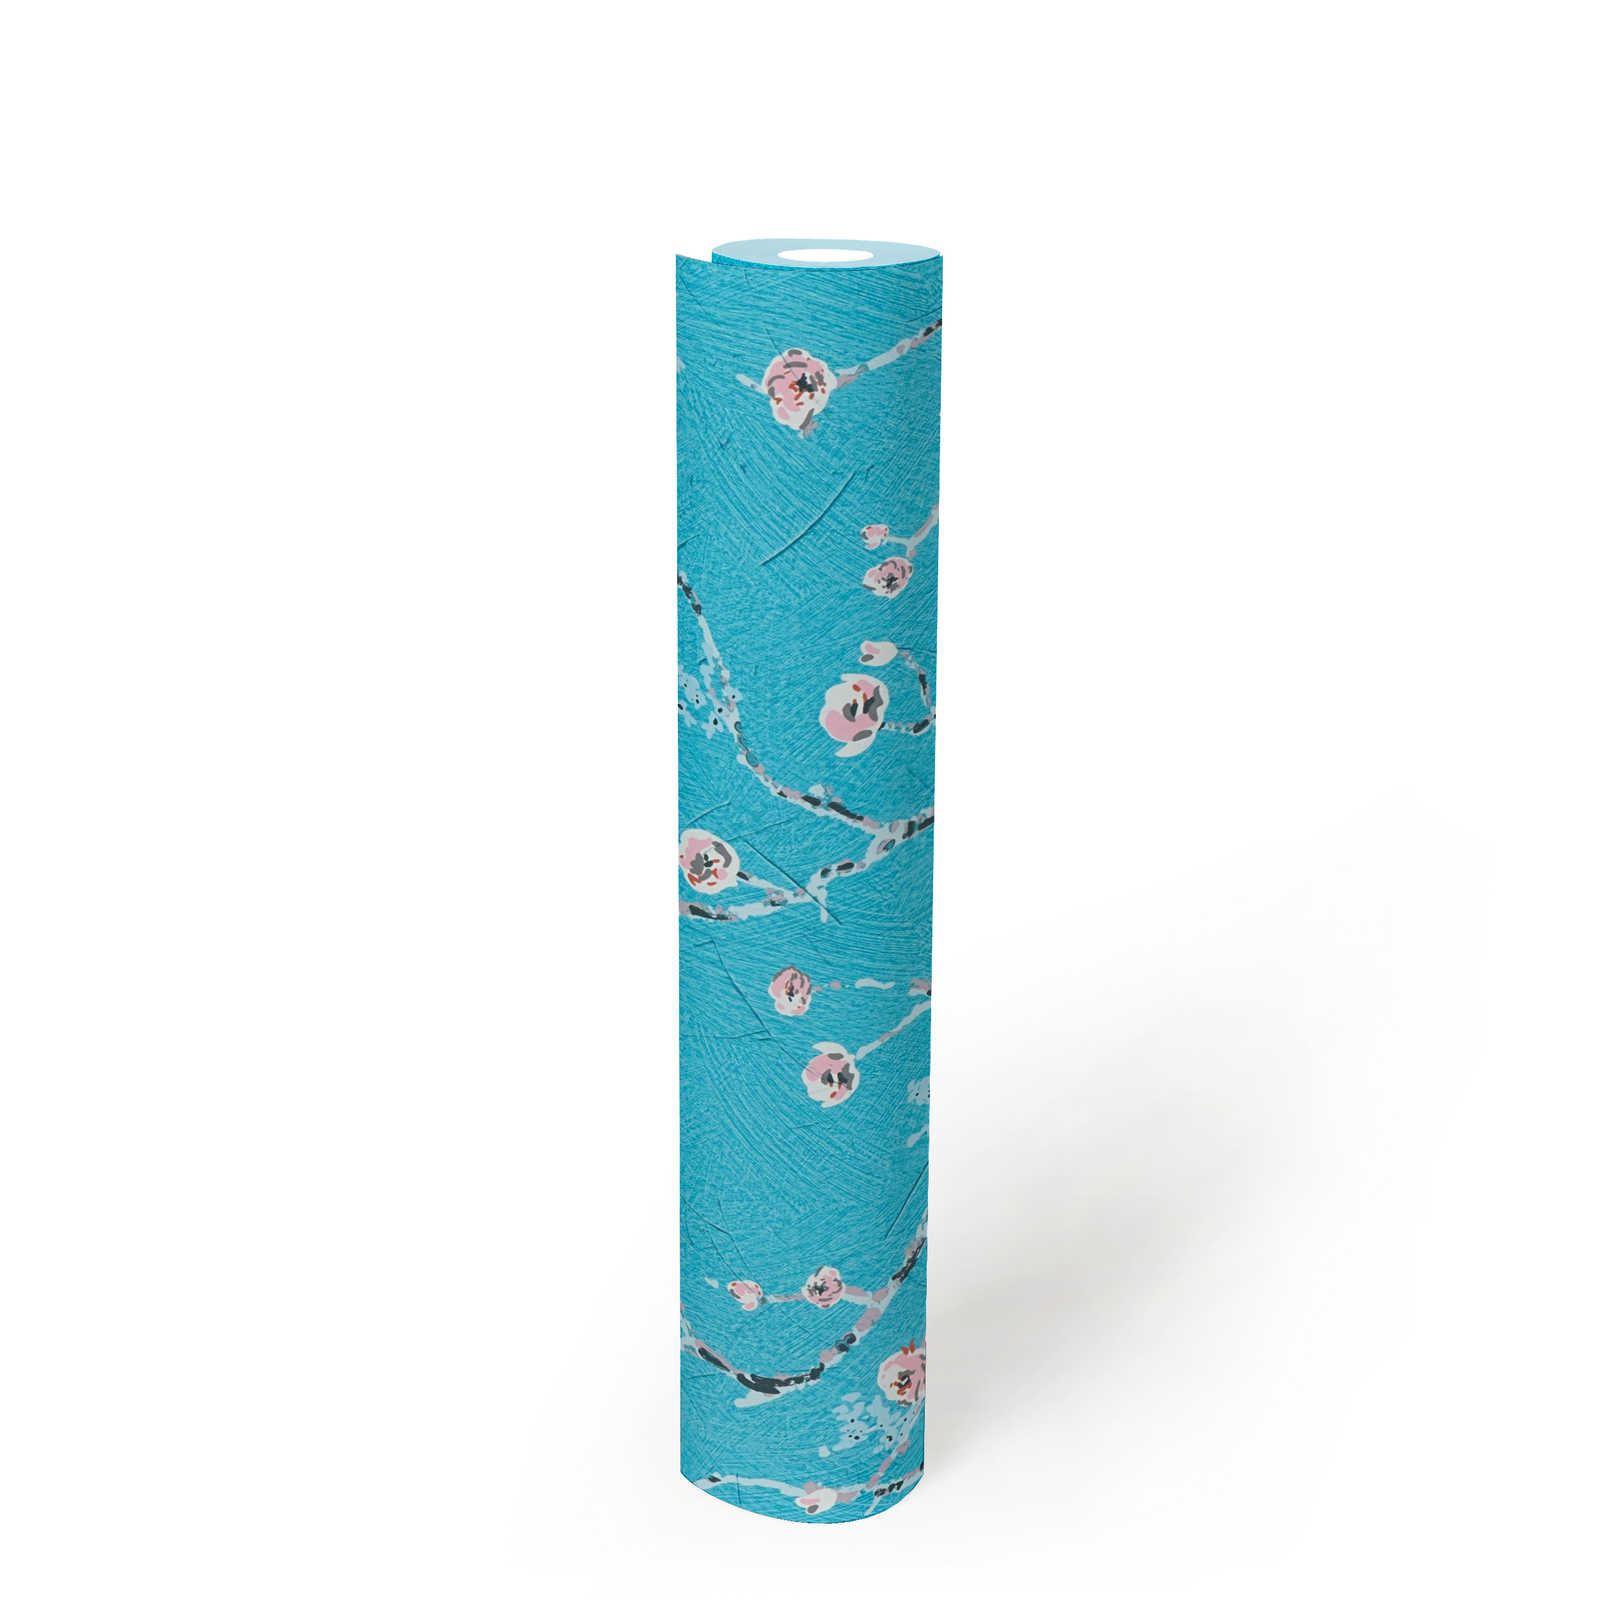             Blue wallpaper with cherry blossom pattern in Japan style
        